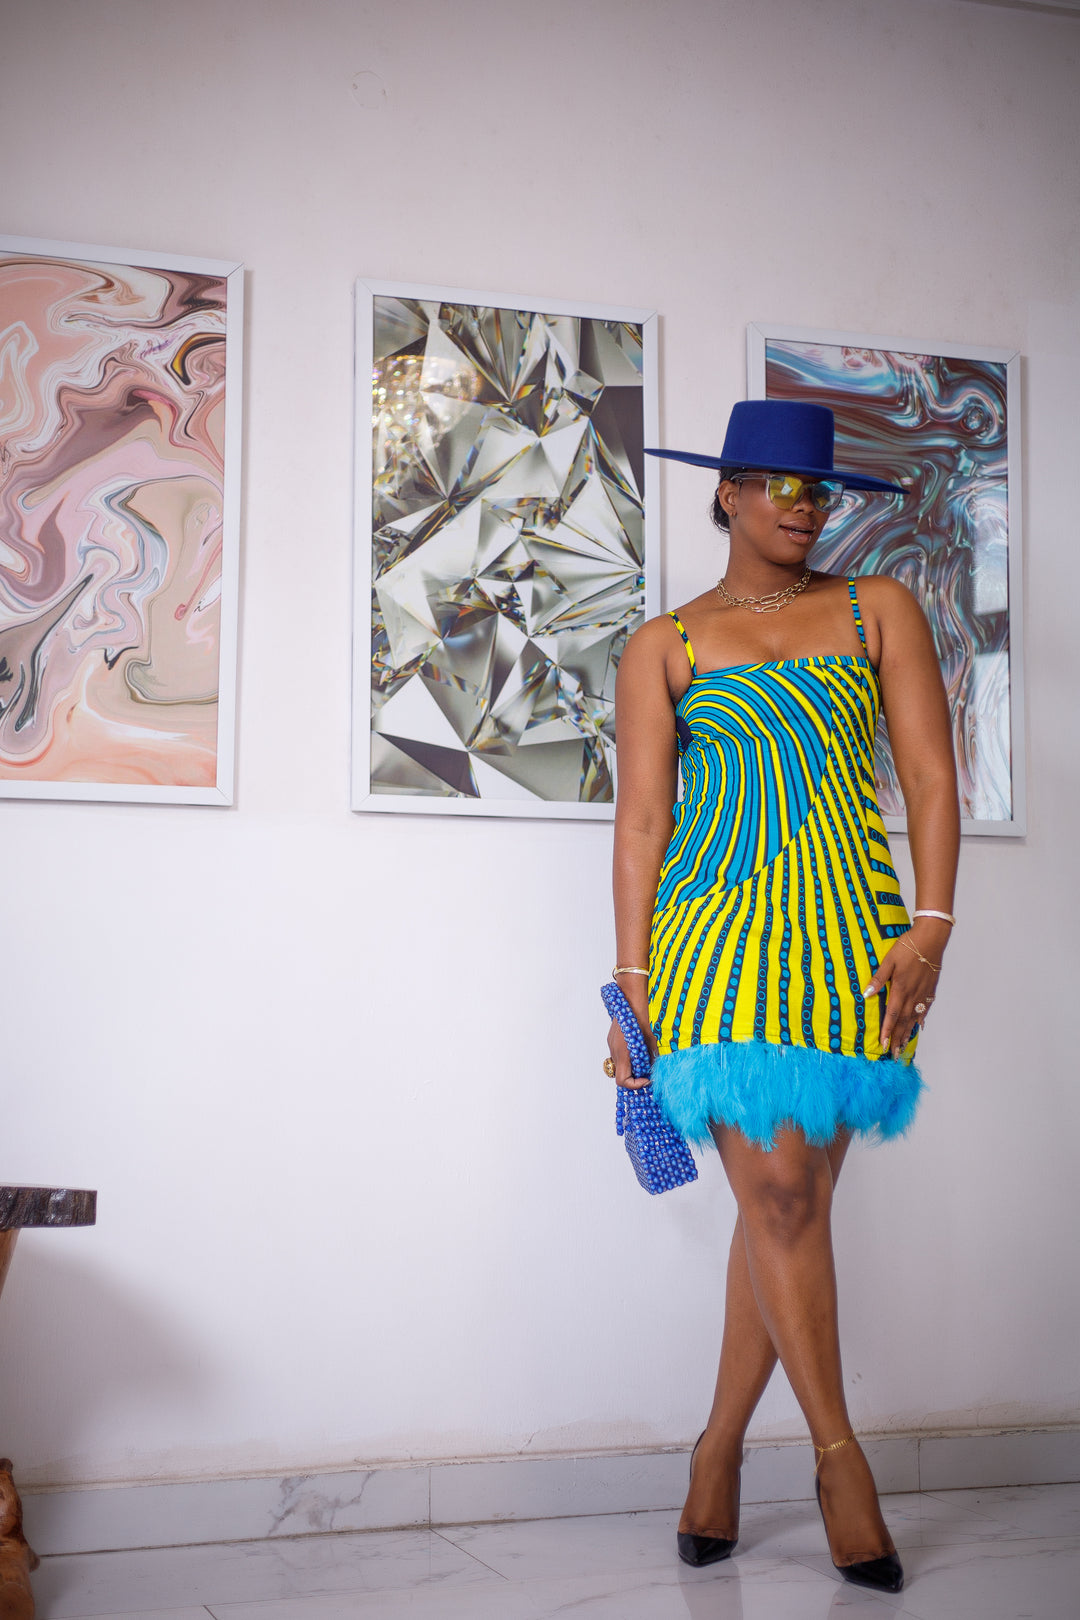 A woman posing in a blue and yellow African print mini dress.